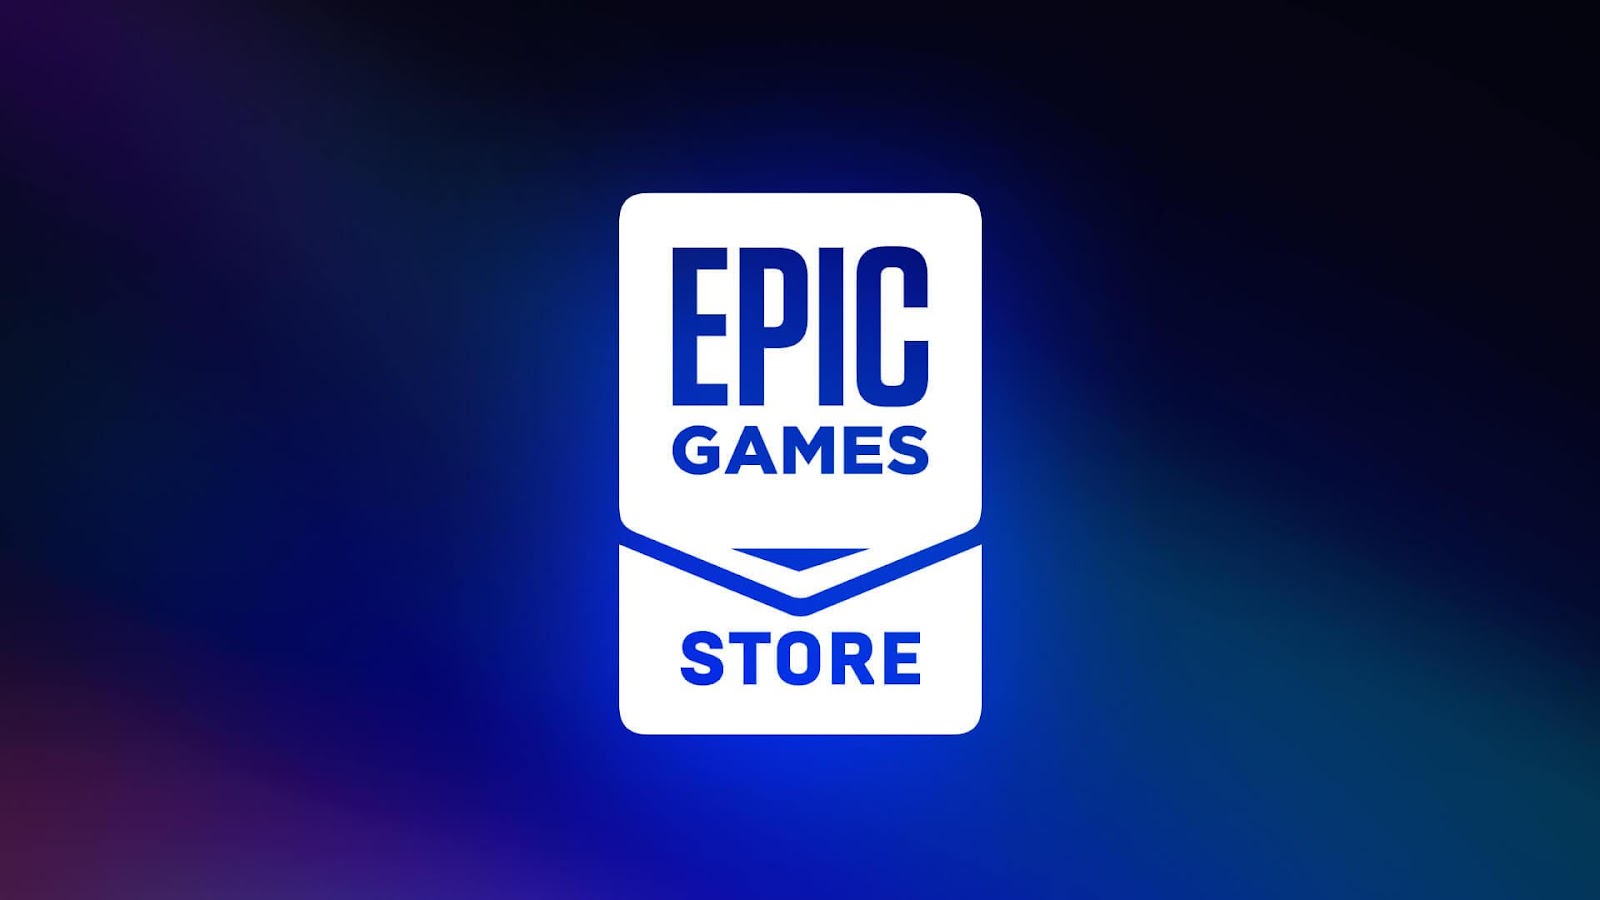 EpicGames.com Activate: How to Activate Epic Games on Any Device in 2023